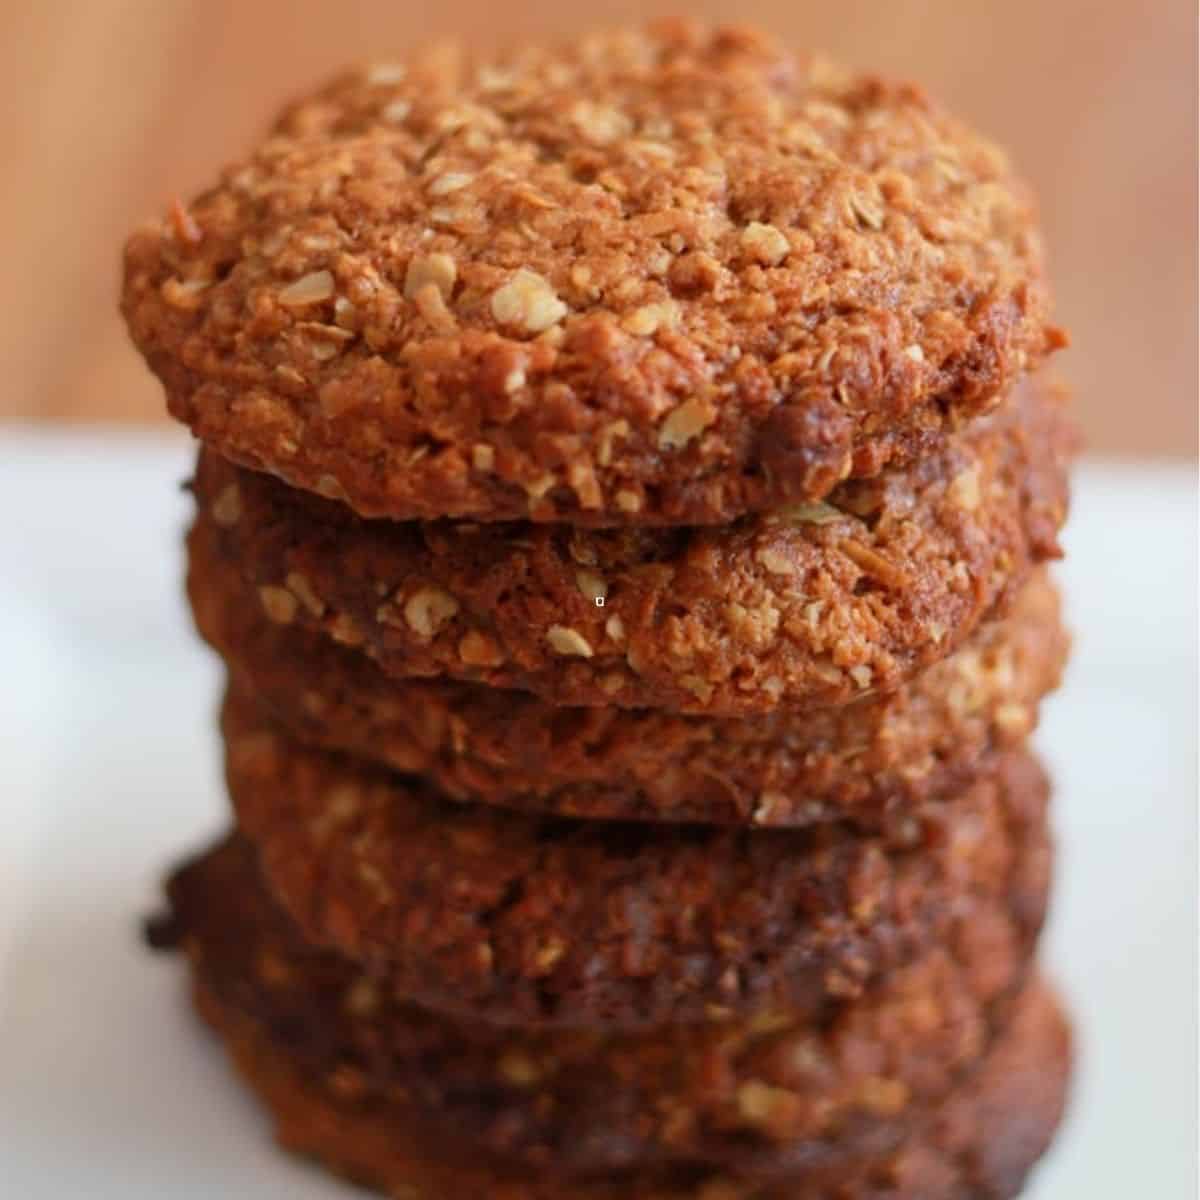 Healthy Anzac Biscuits